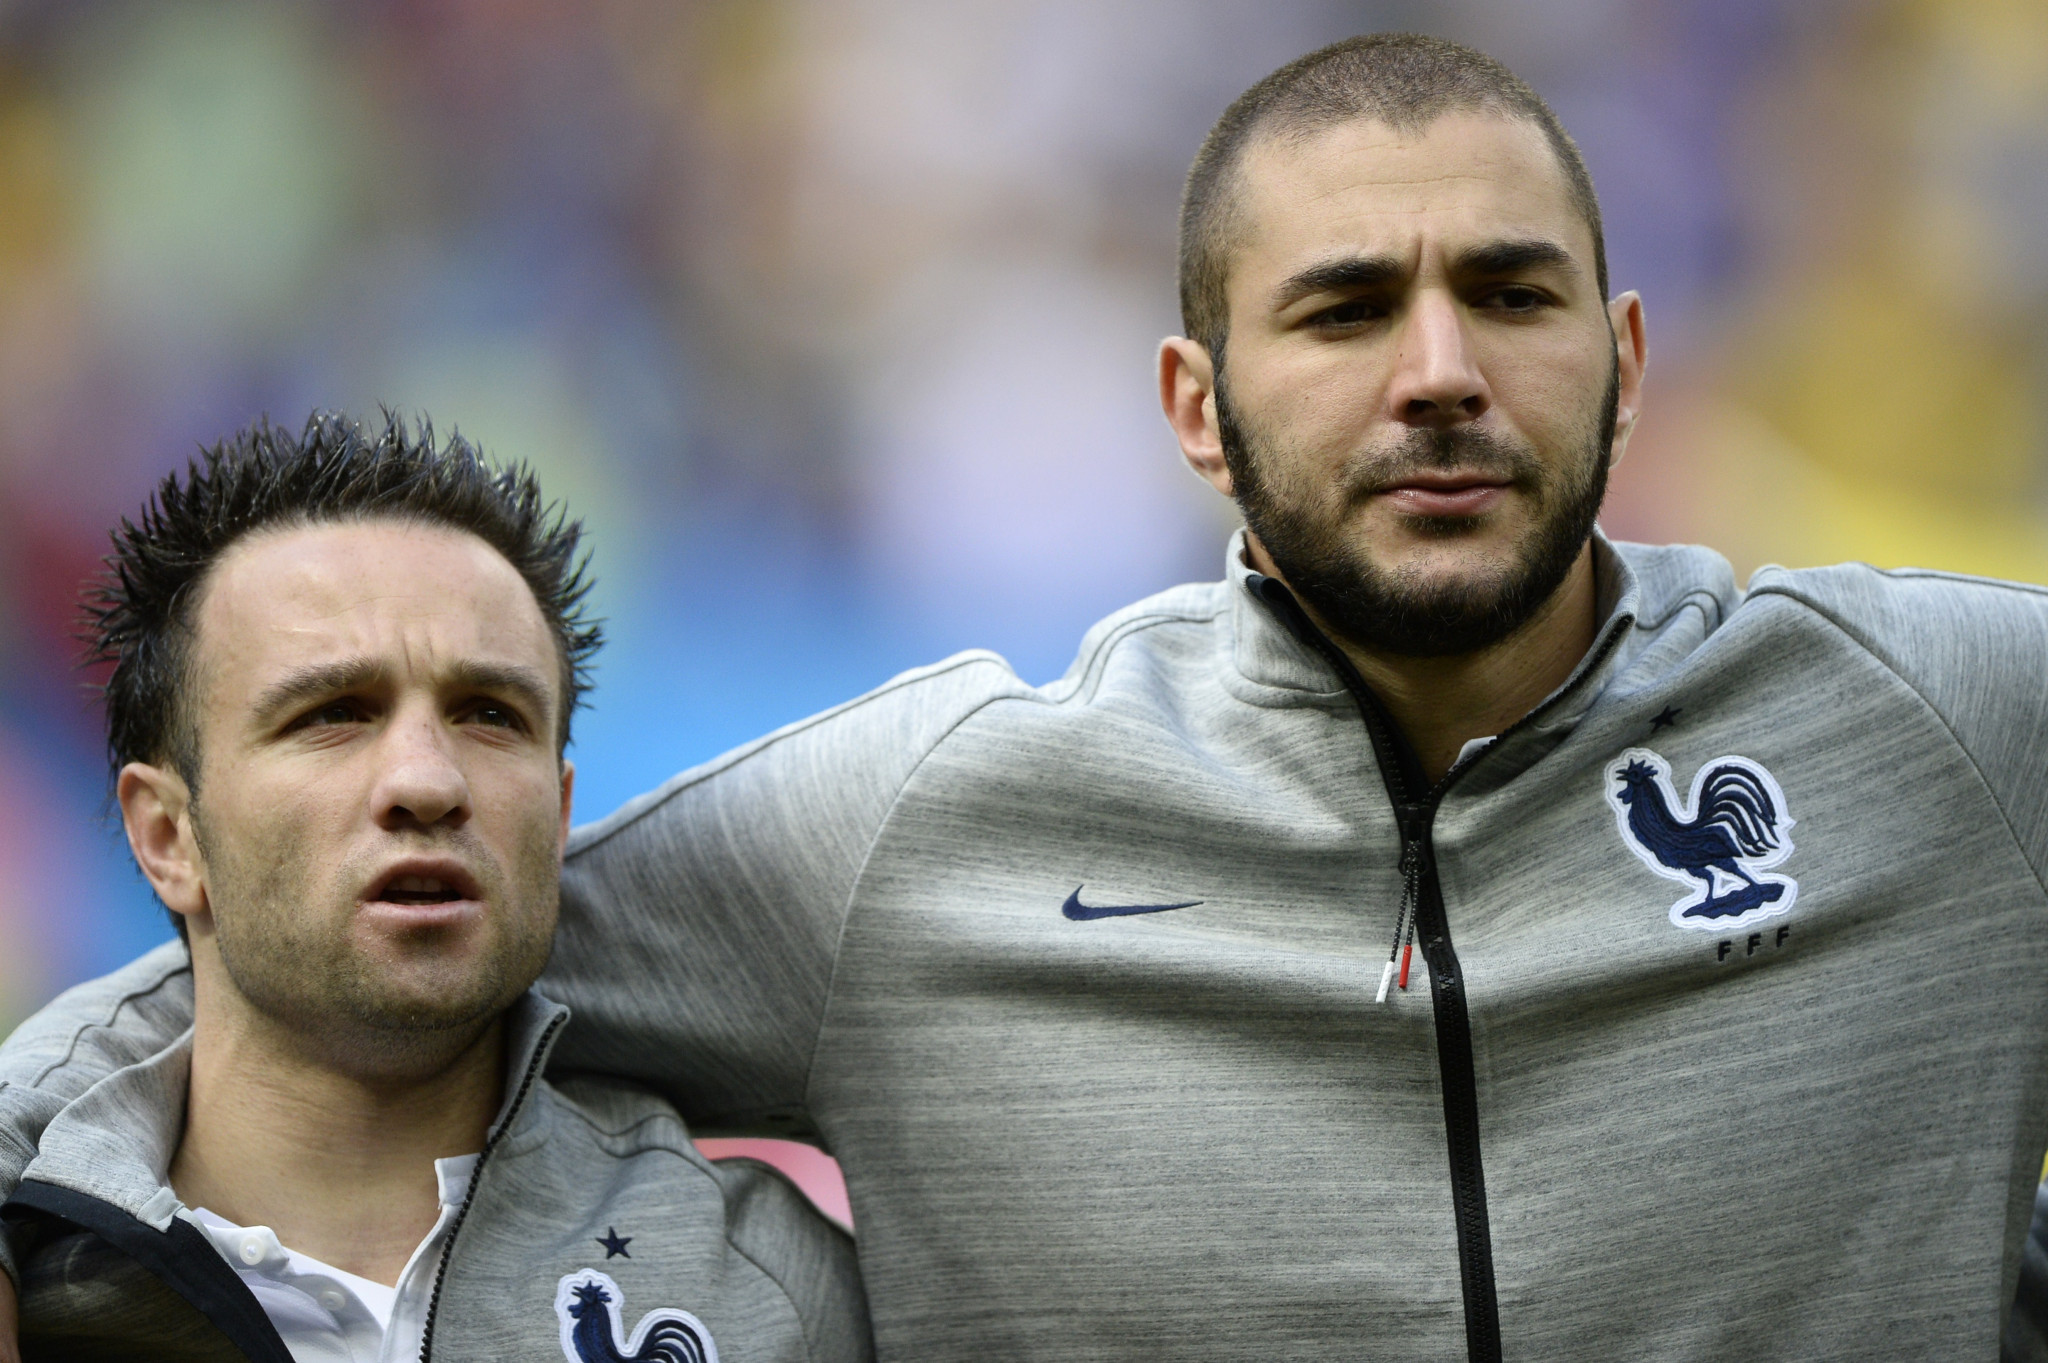 Mathieu Valbuena, left, and Karim Benzema, right, played together on the French team between 2010 and 2015 ©Getty Images